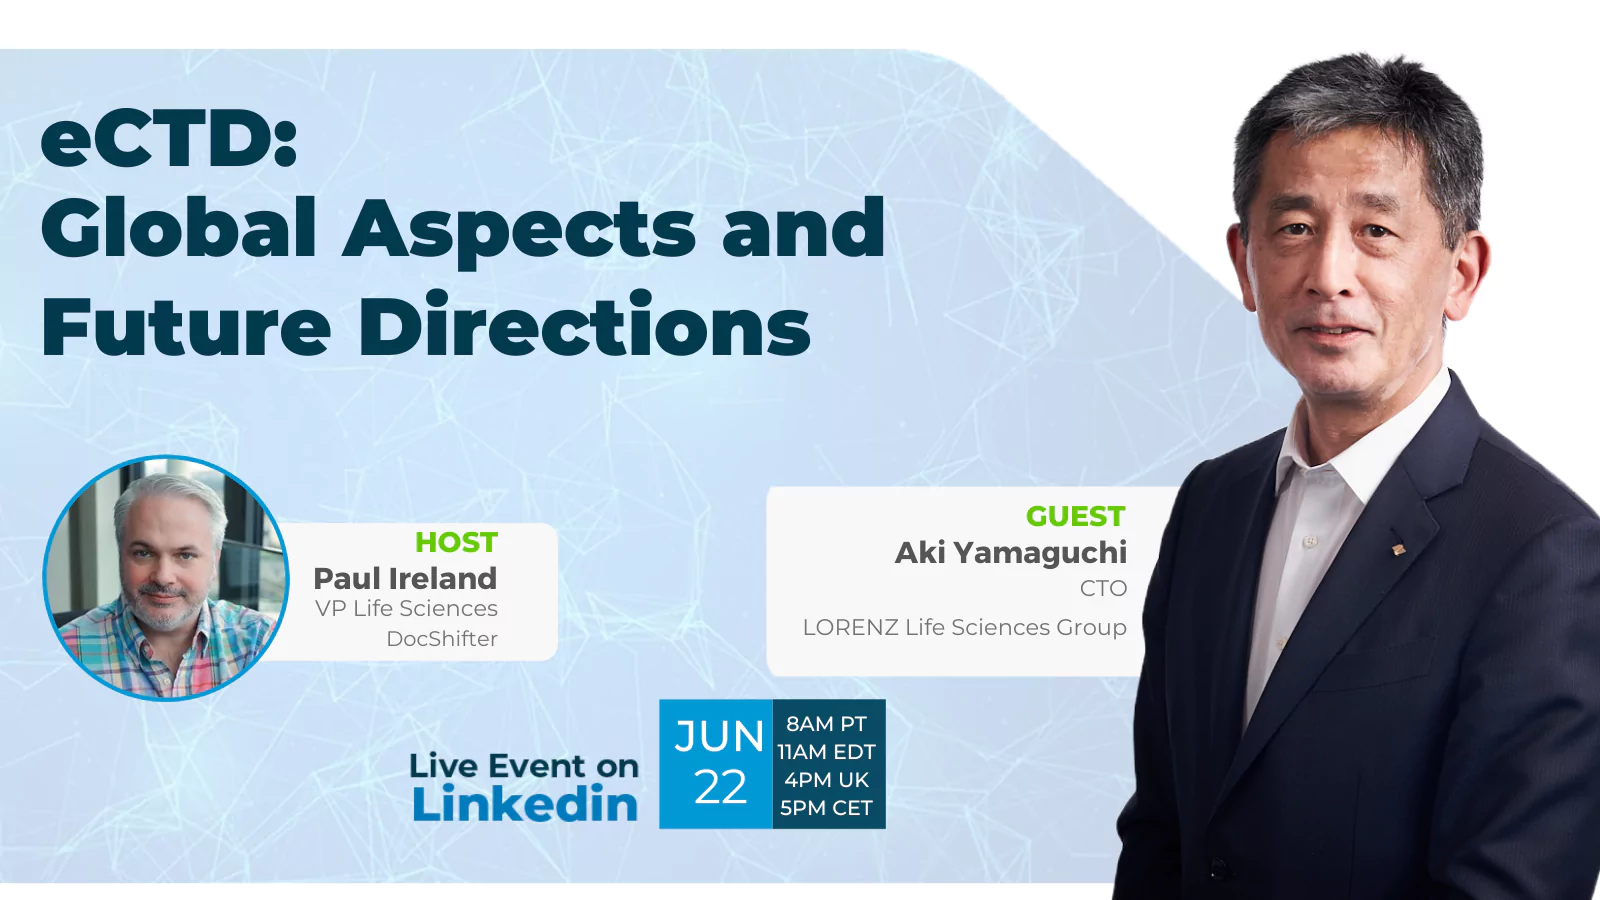 eCTD: Global aspects and future directions - LinkedIn Live Session with Aki Yamaguchi from LORENZ Life Sciences Group & Paul Ireland from DocShifter